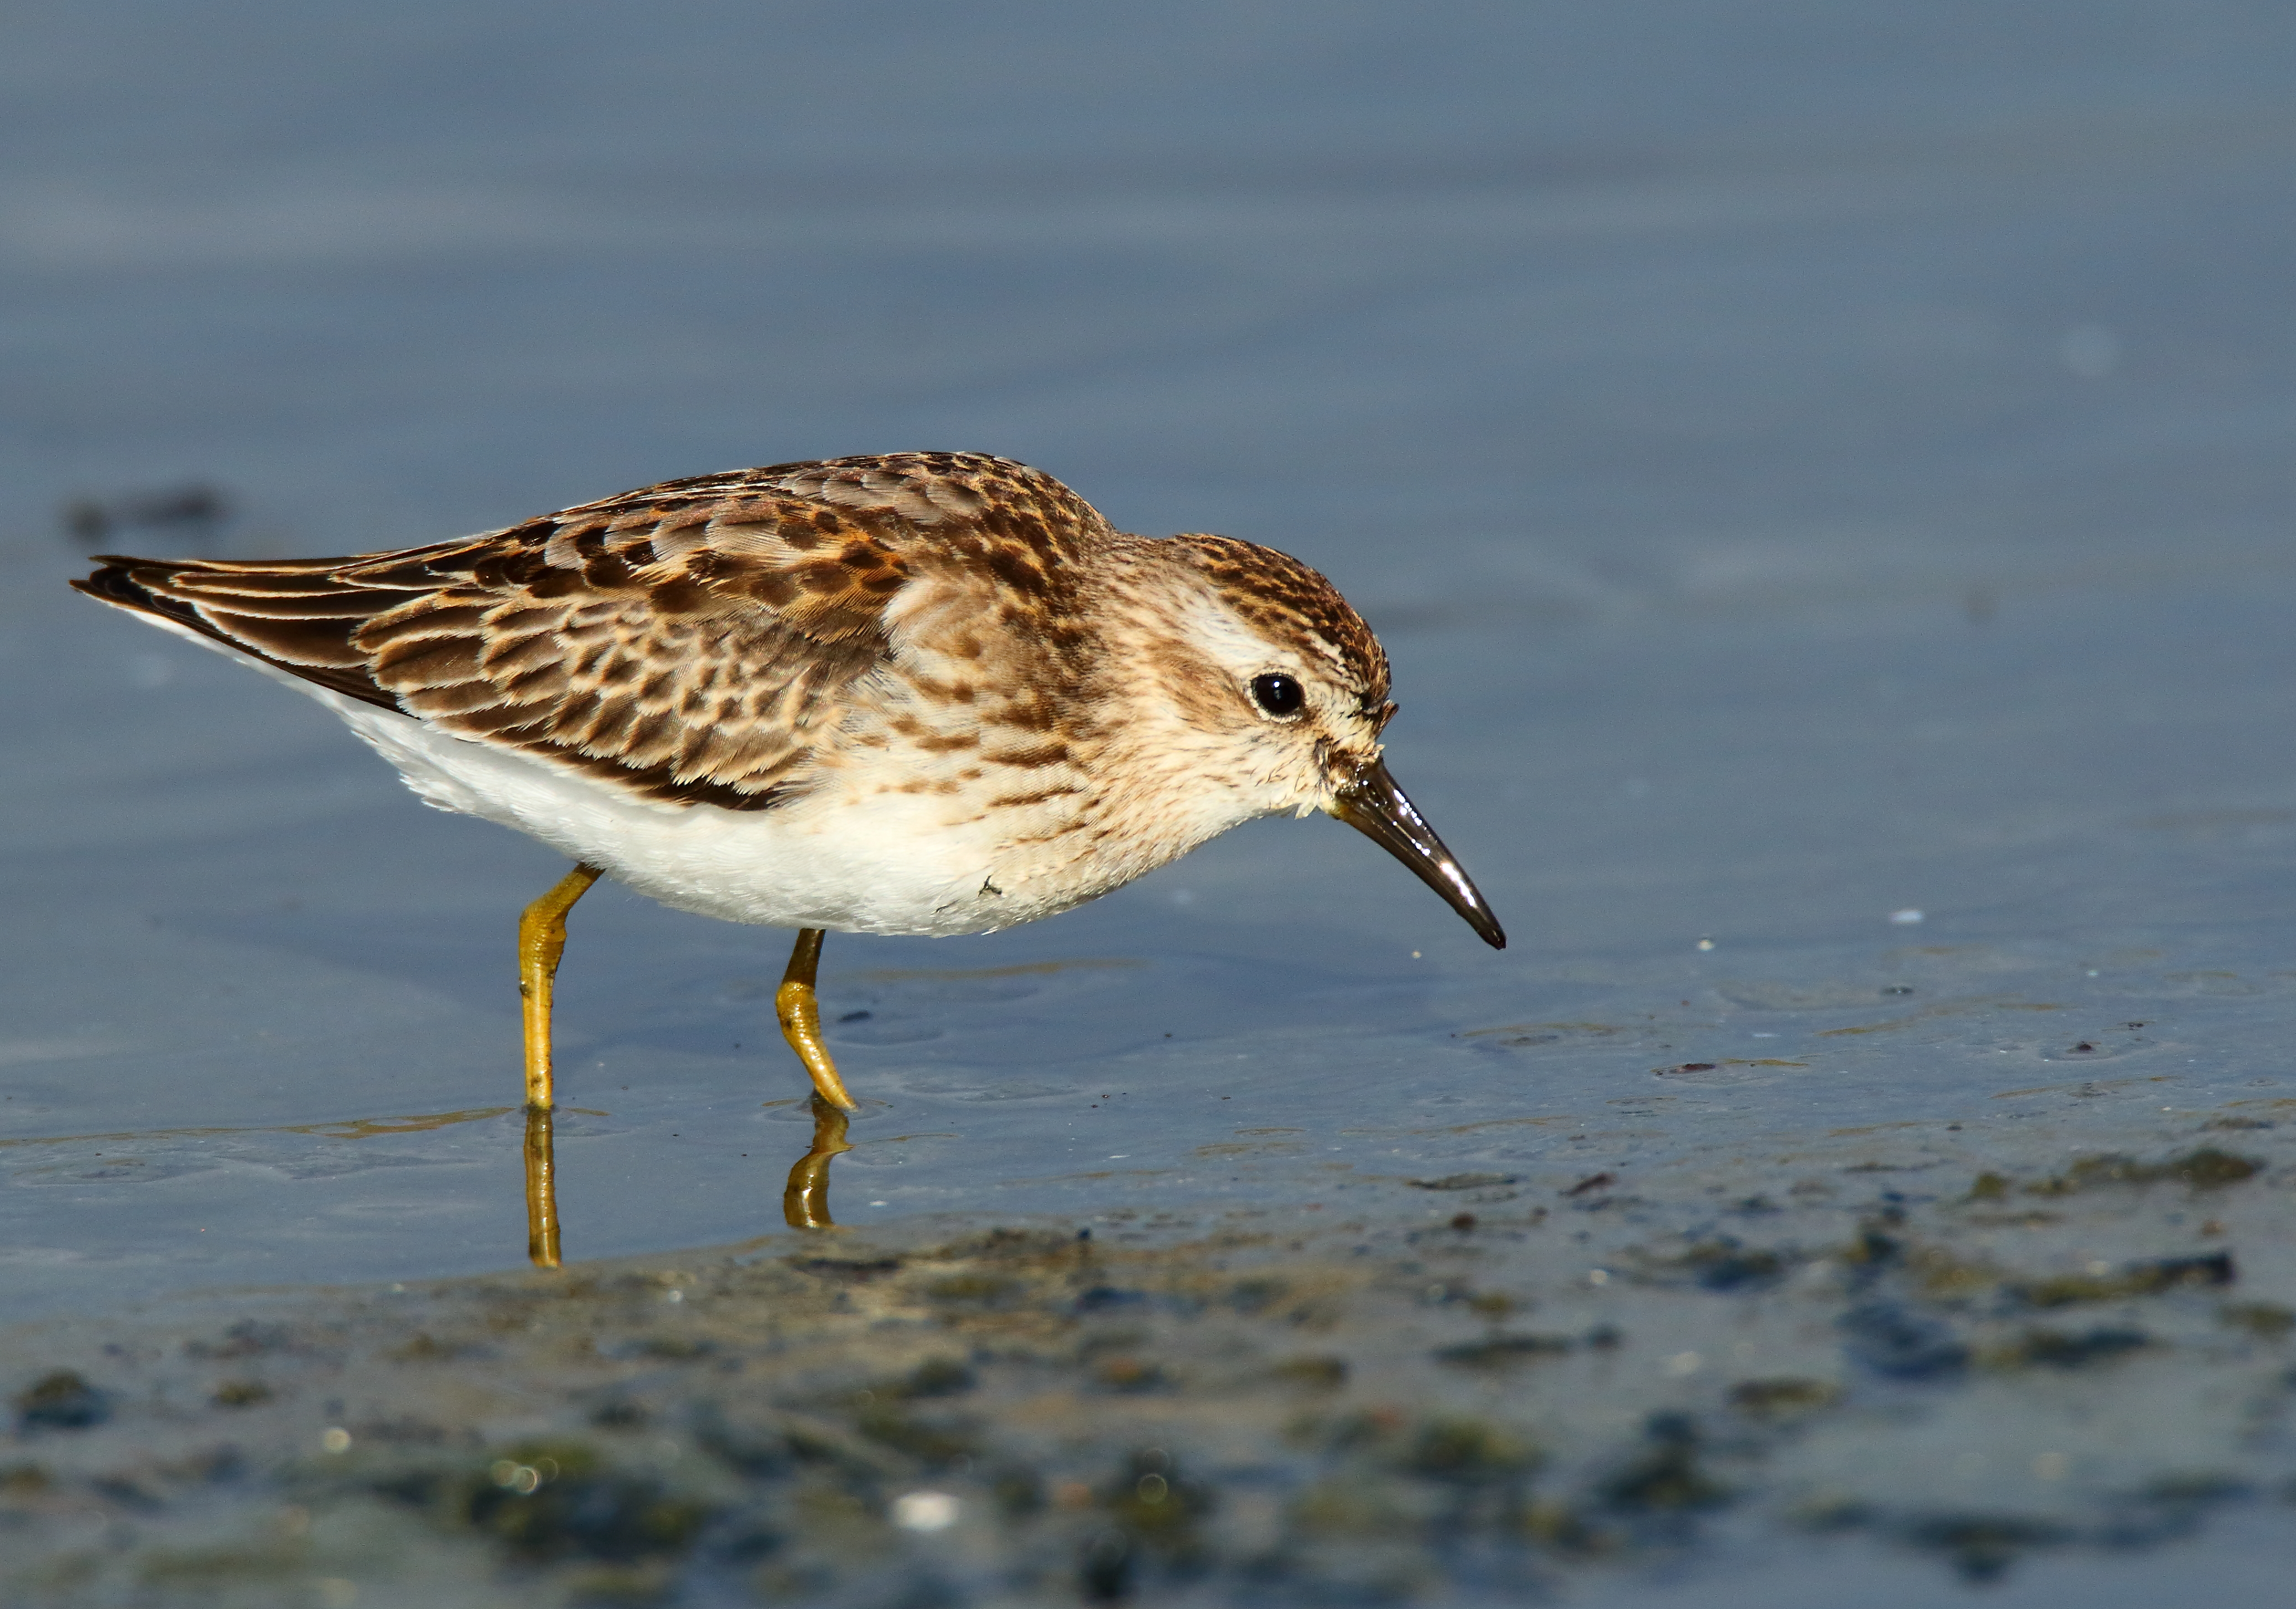 In late spring and late summer through early fall, look for the dull yellow legs of the Least Sandpiper, which may stop through Pugsley Creek Park during migration. Photo: Isaac Grant